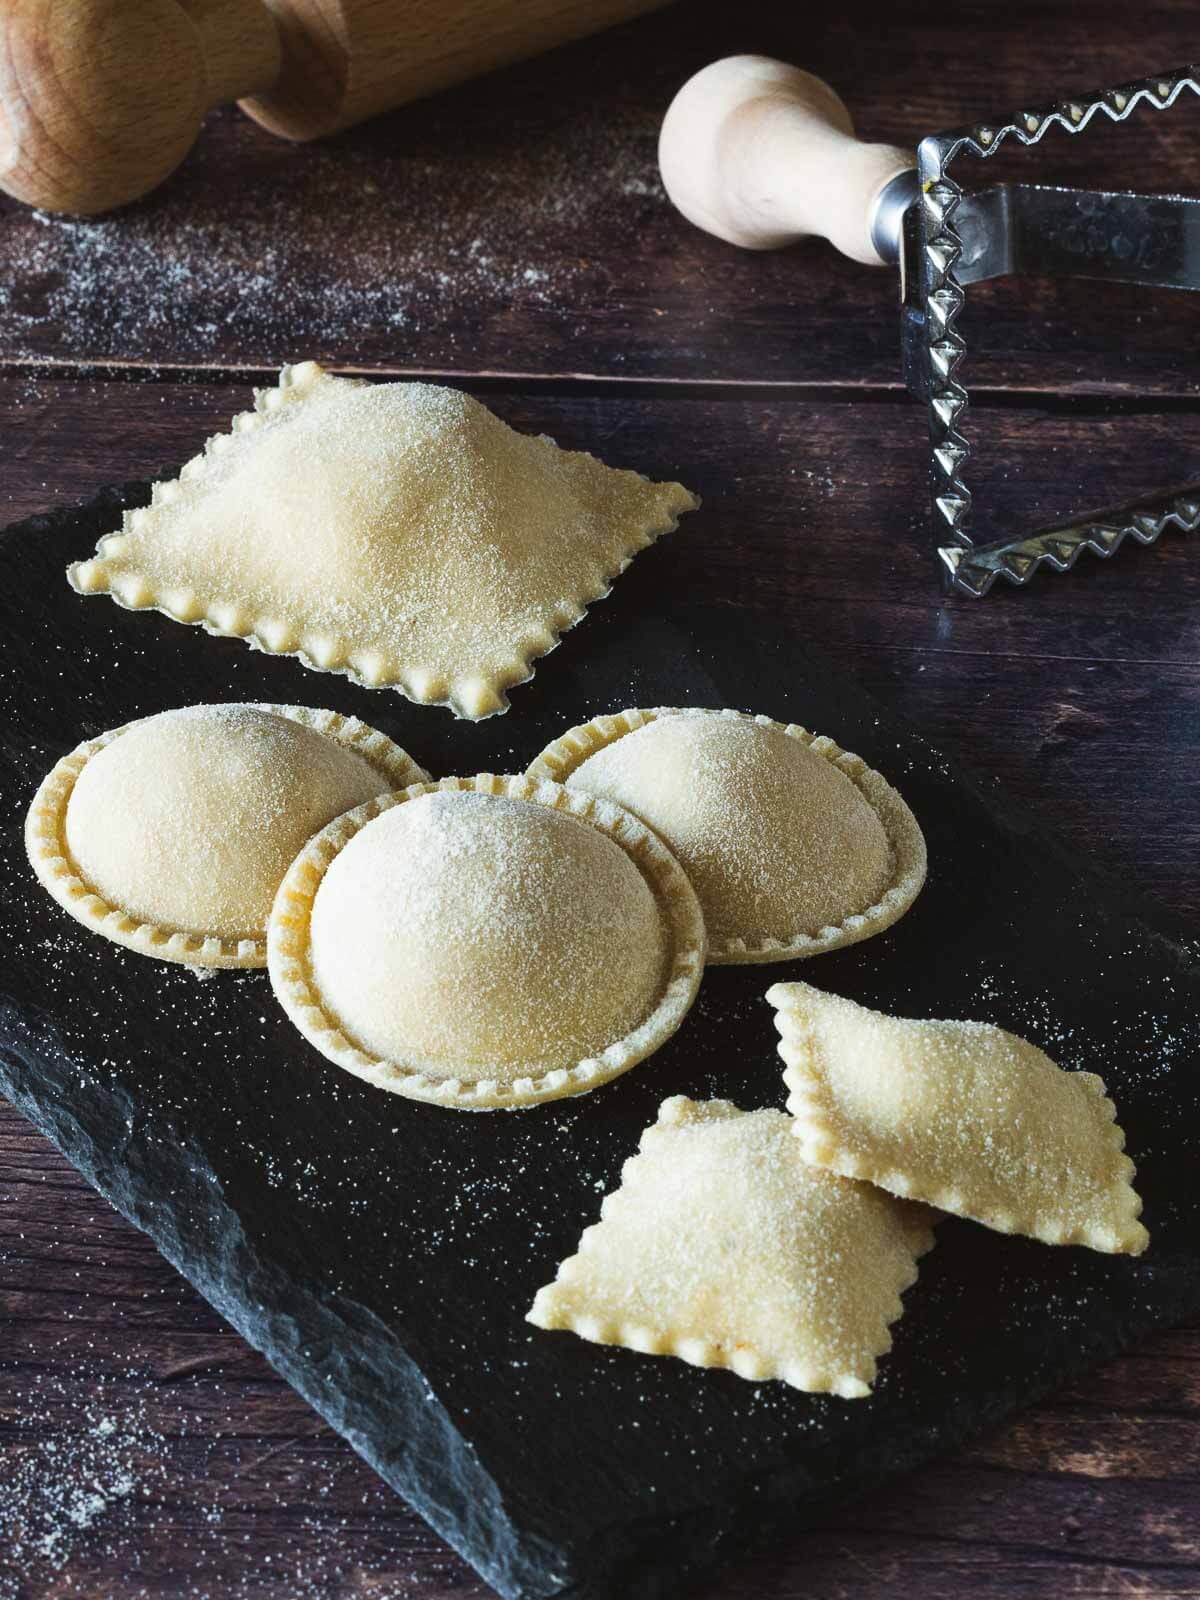 ravioli cut with different methods and shapes